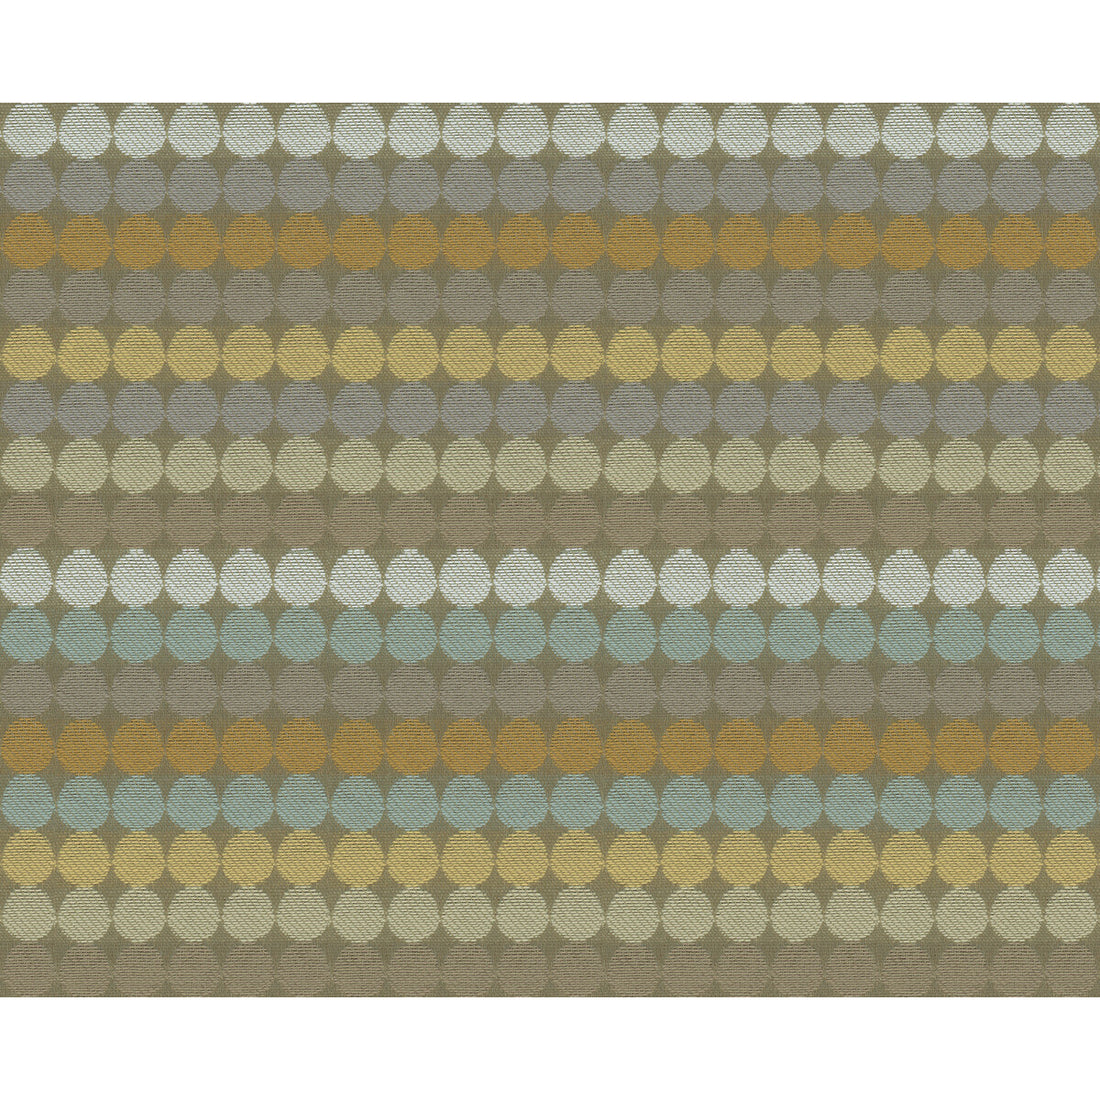 Grab Bag fabric in sea glass color - pattern 34656.106.0 - by Kravet Contract in the Gis collection